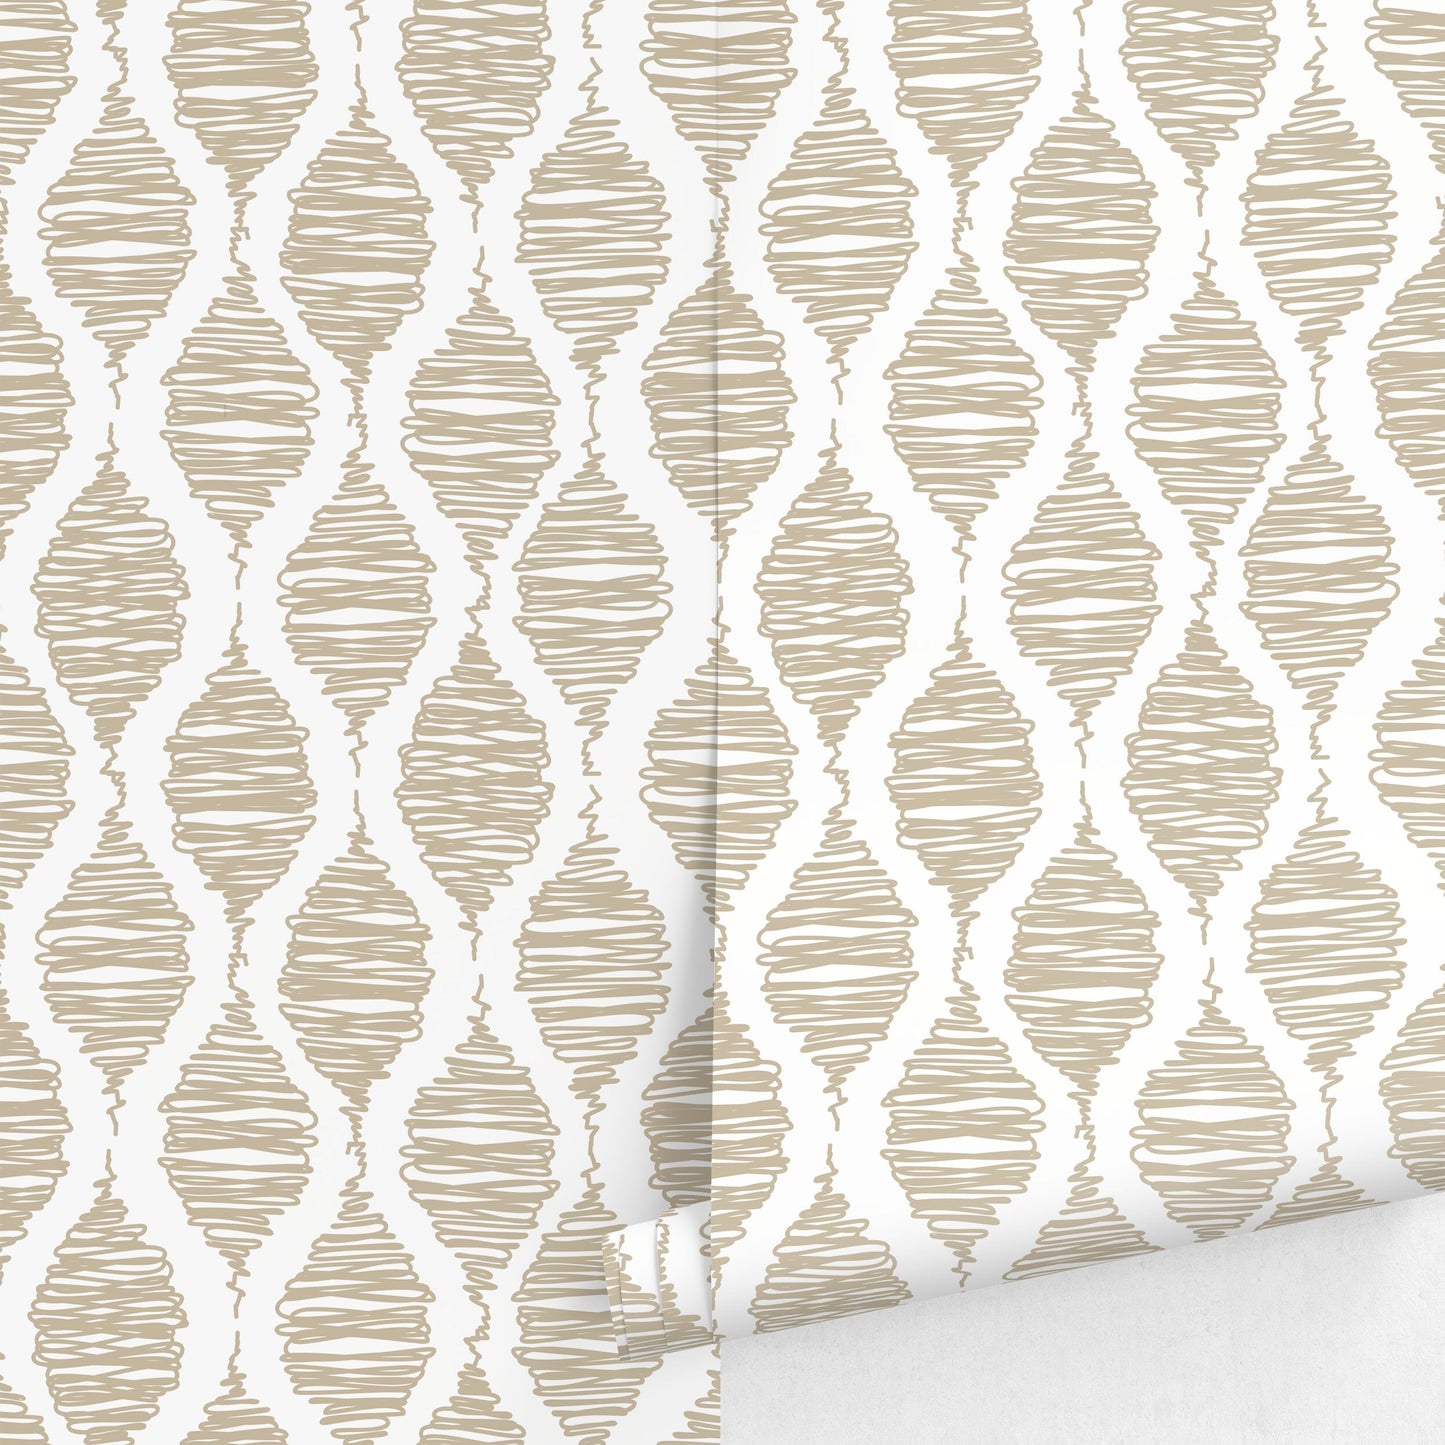 Wallpaper Peel and Stick Wallpaper Removable Wallpaper Home Decor Wall Art Wall Decor Room Decor / Wavy Art Abstract Wallpaper - C580